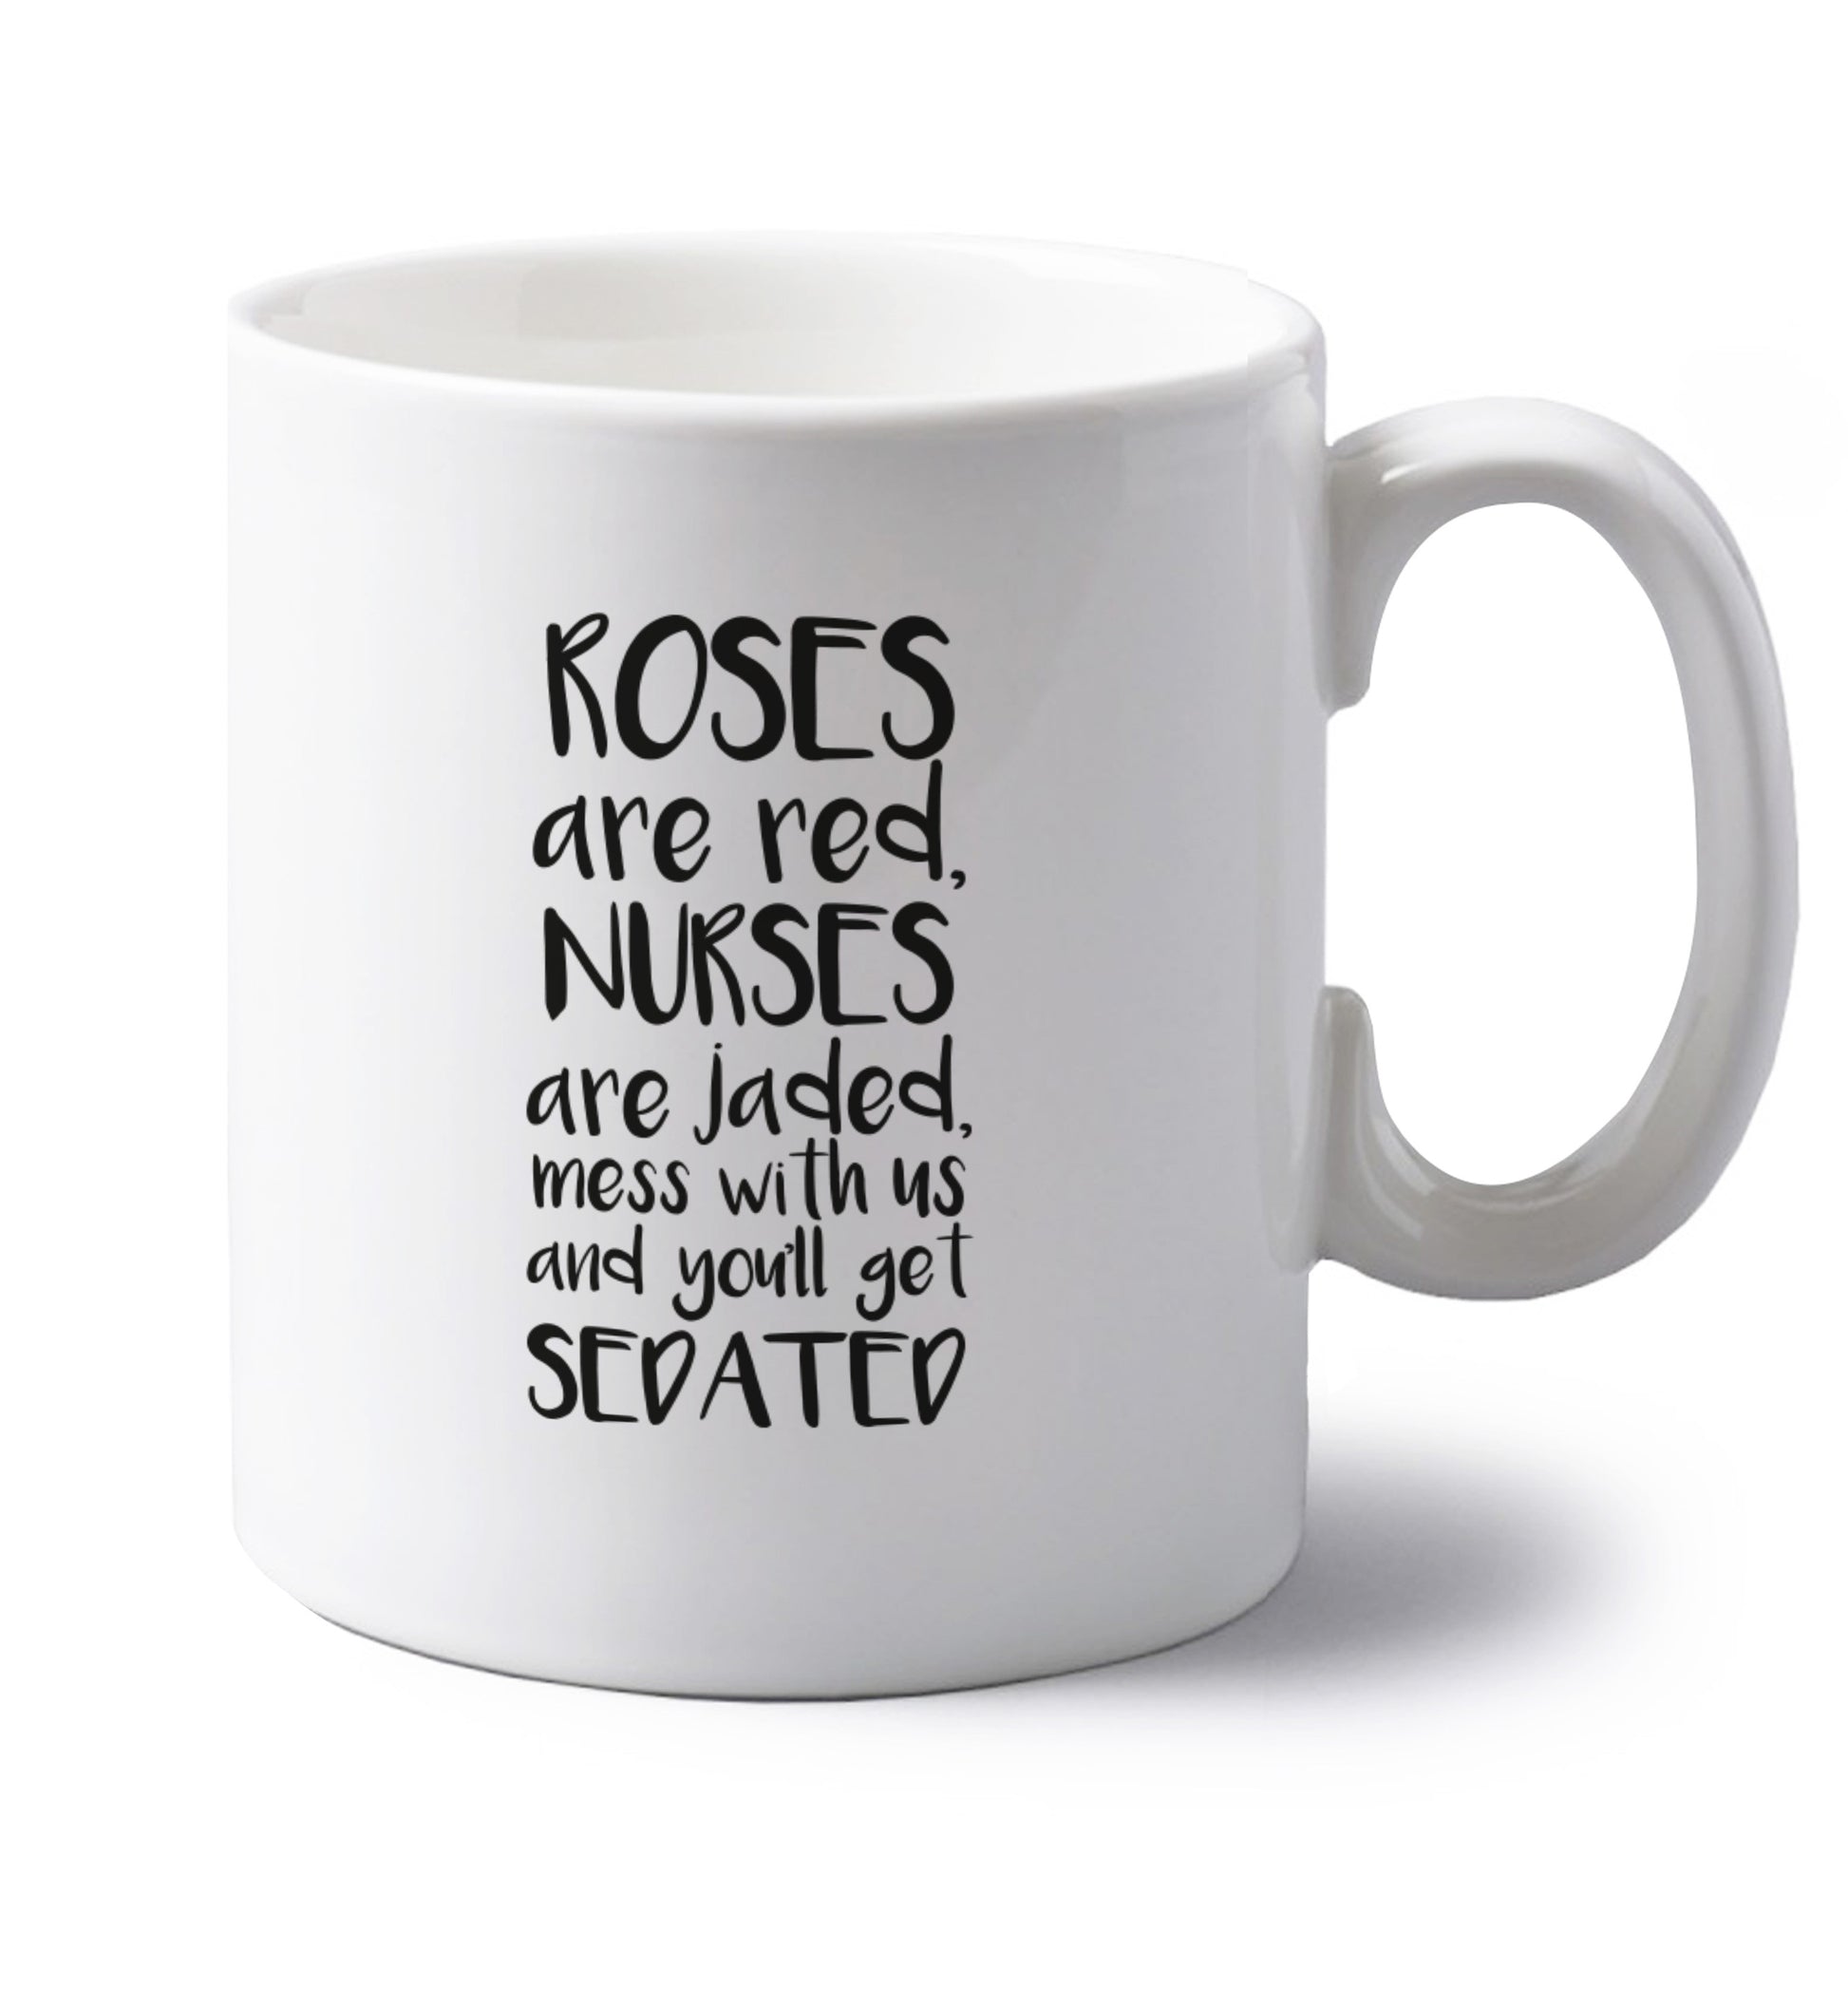 Roses are red, nurses are jaded, mess with us and you'll get sedated left handed white ceramic mug 